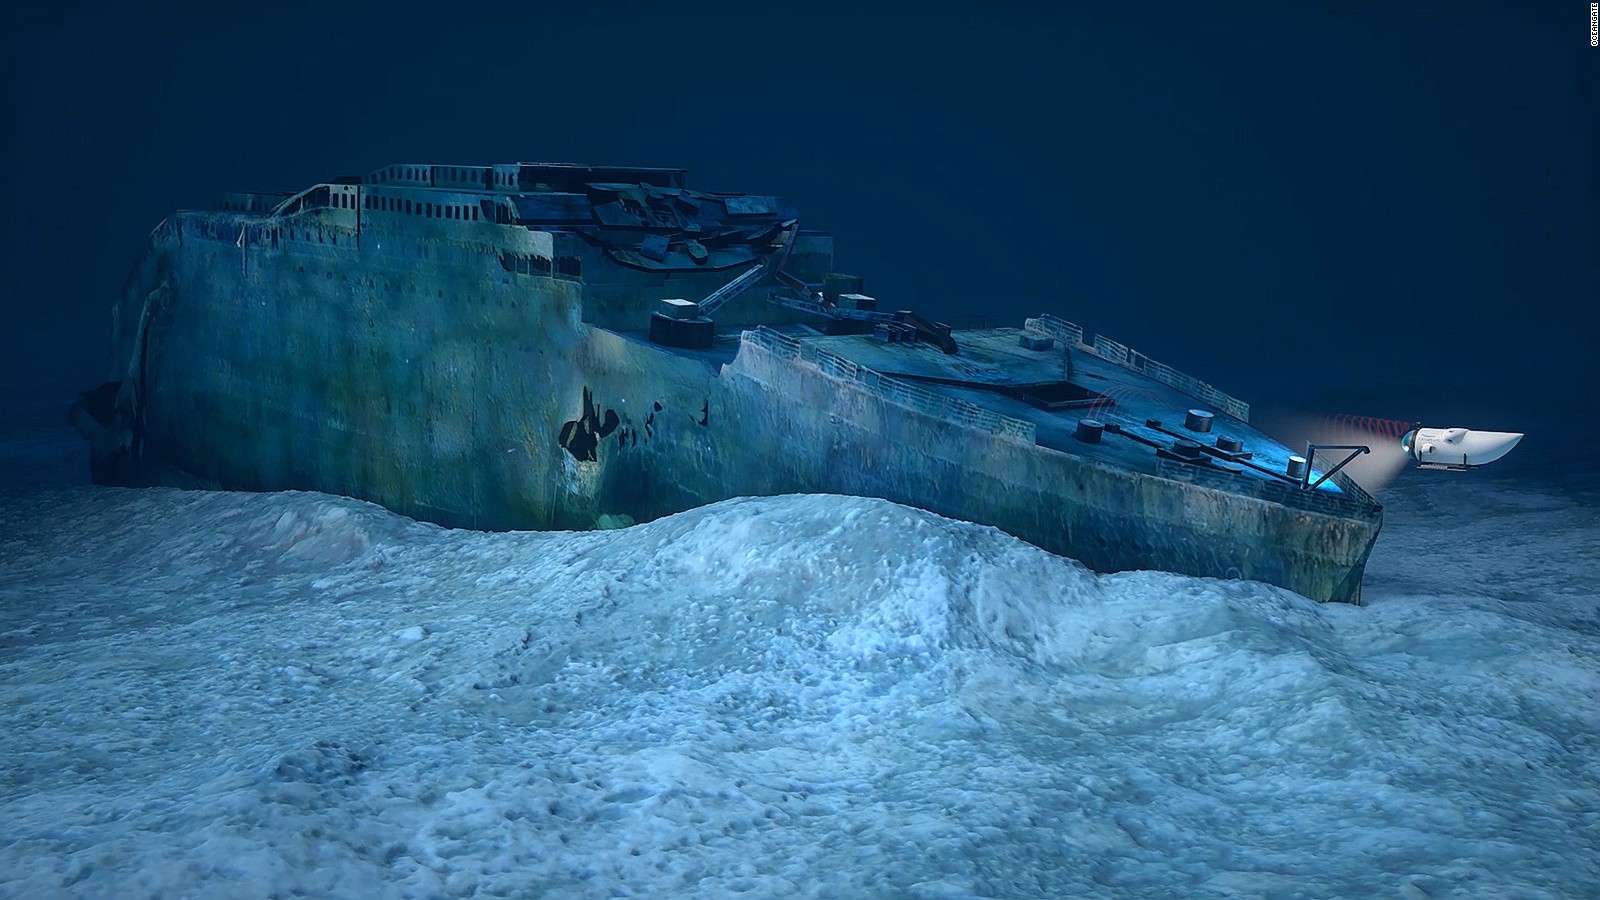 Diving Tours Of Titanic Wreck Site To Begin In 2019 Cnn Travel